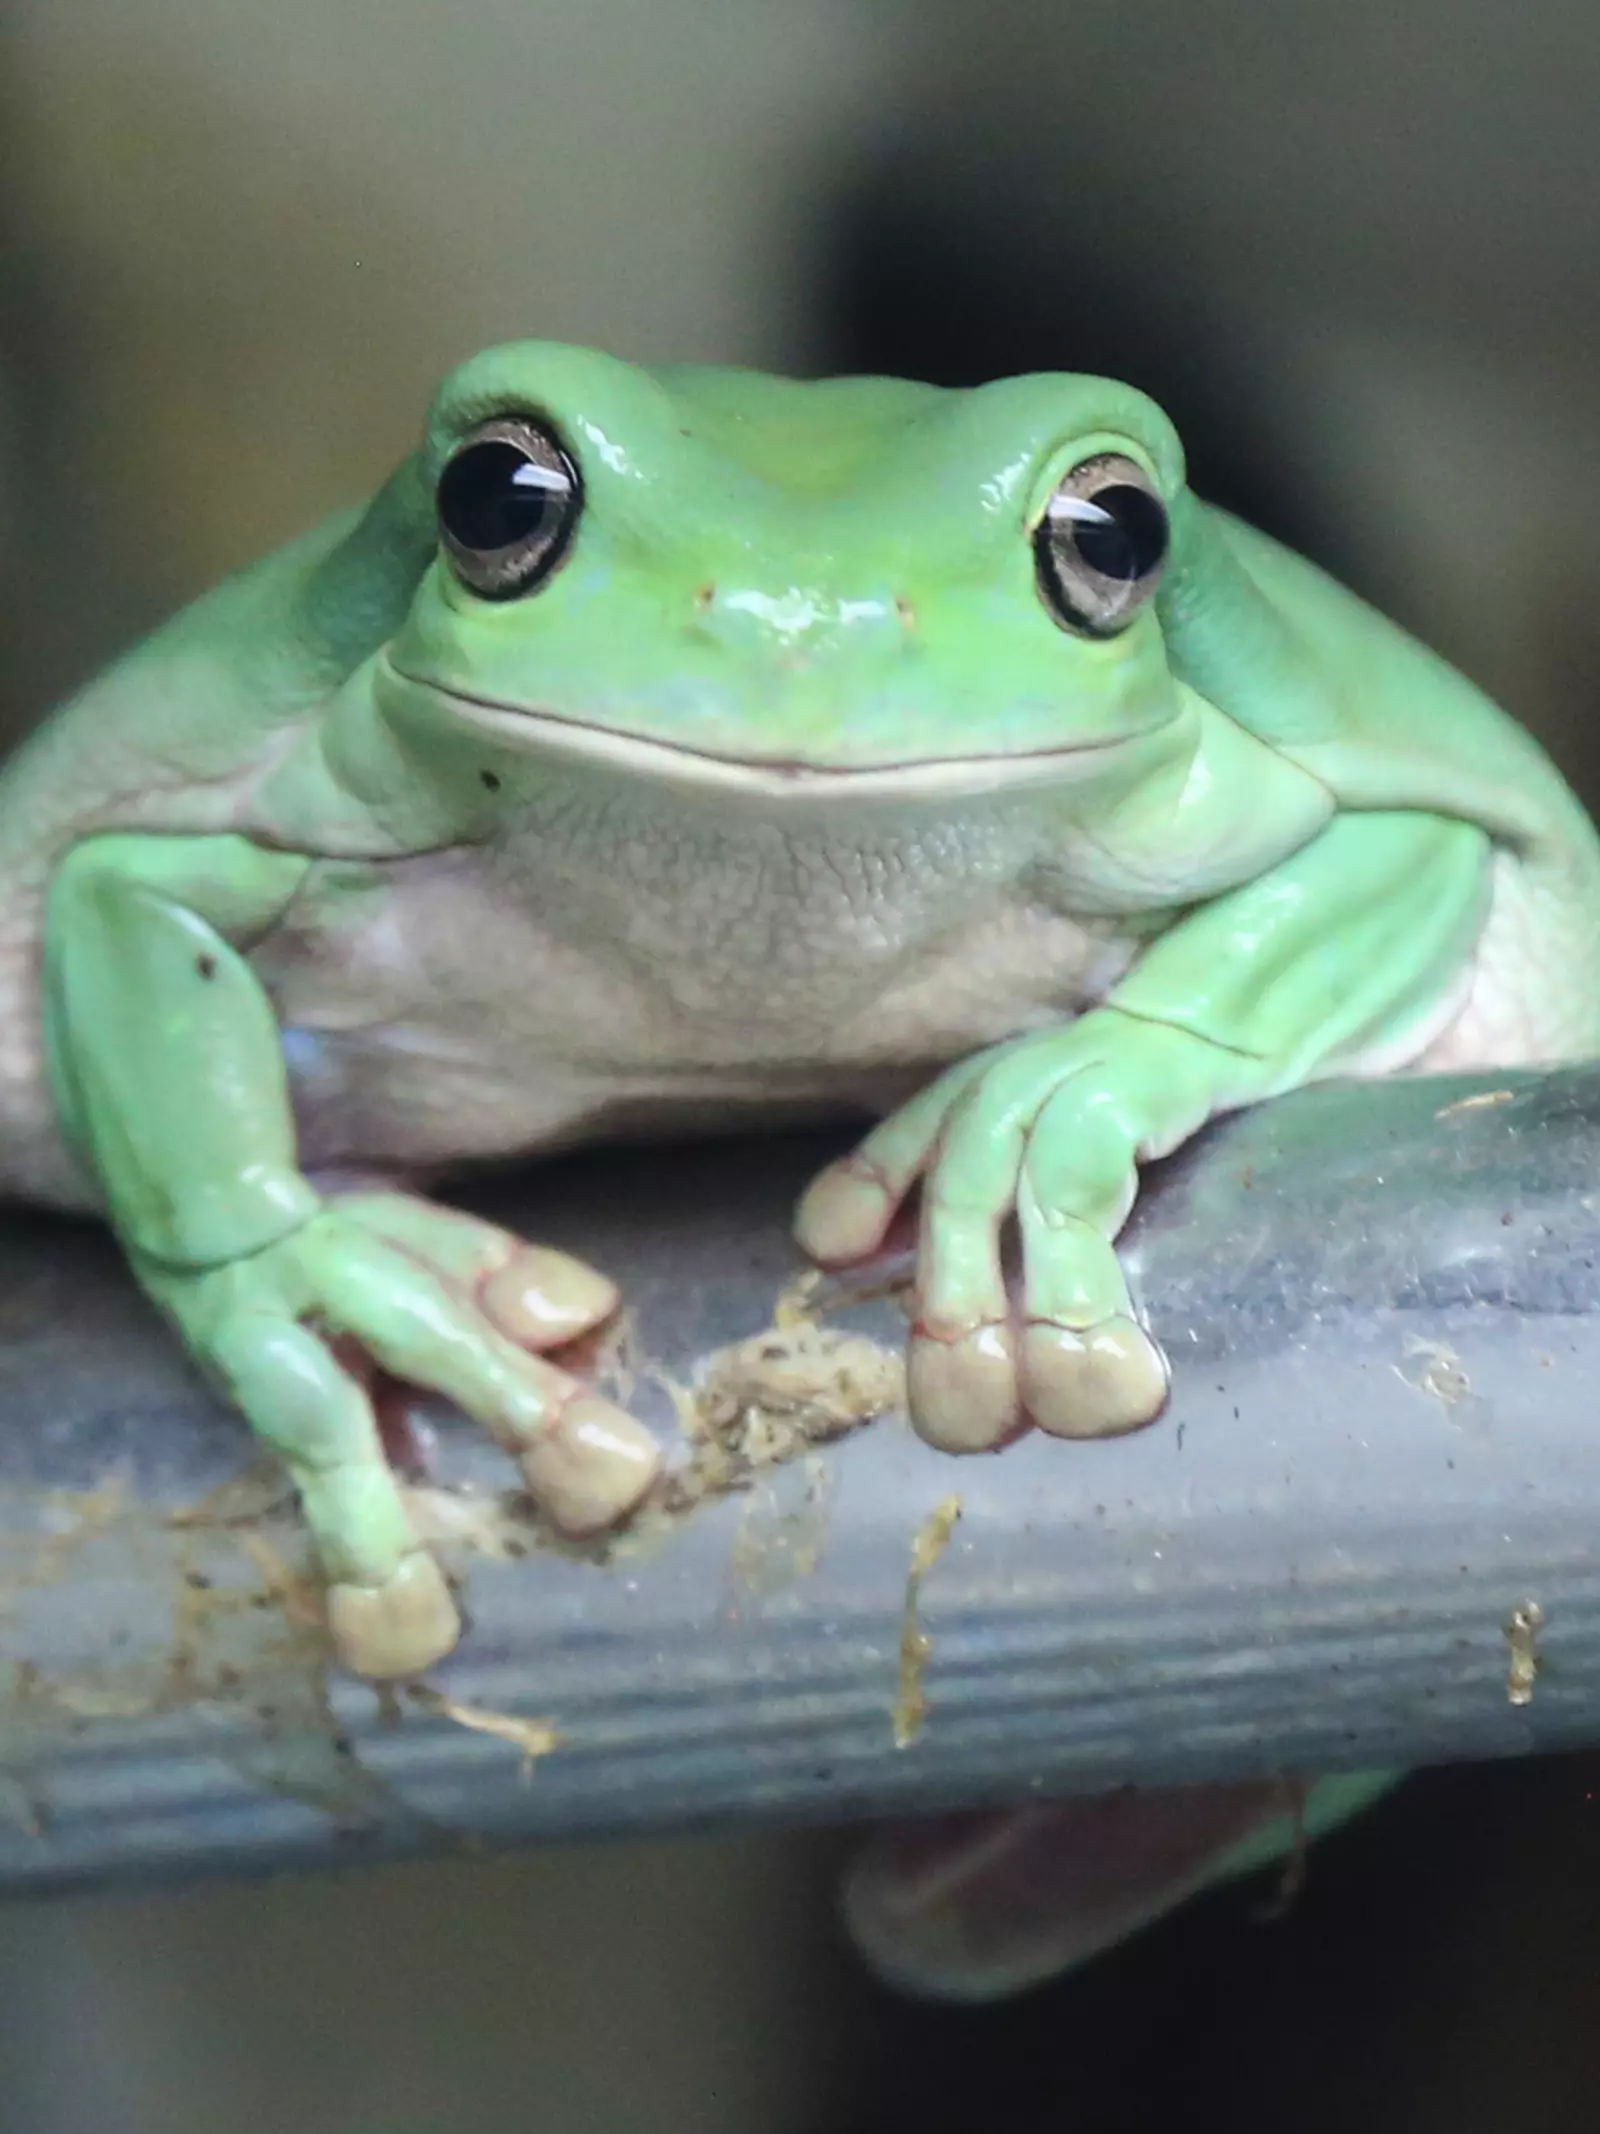 White's tree frog perched on a metal bar